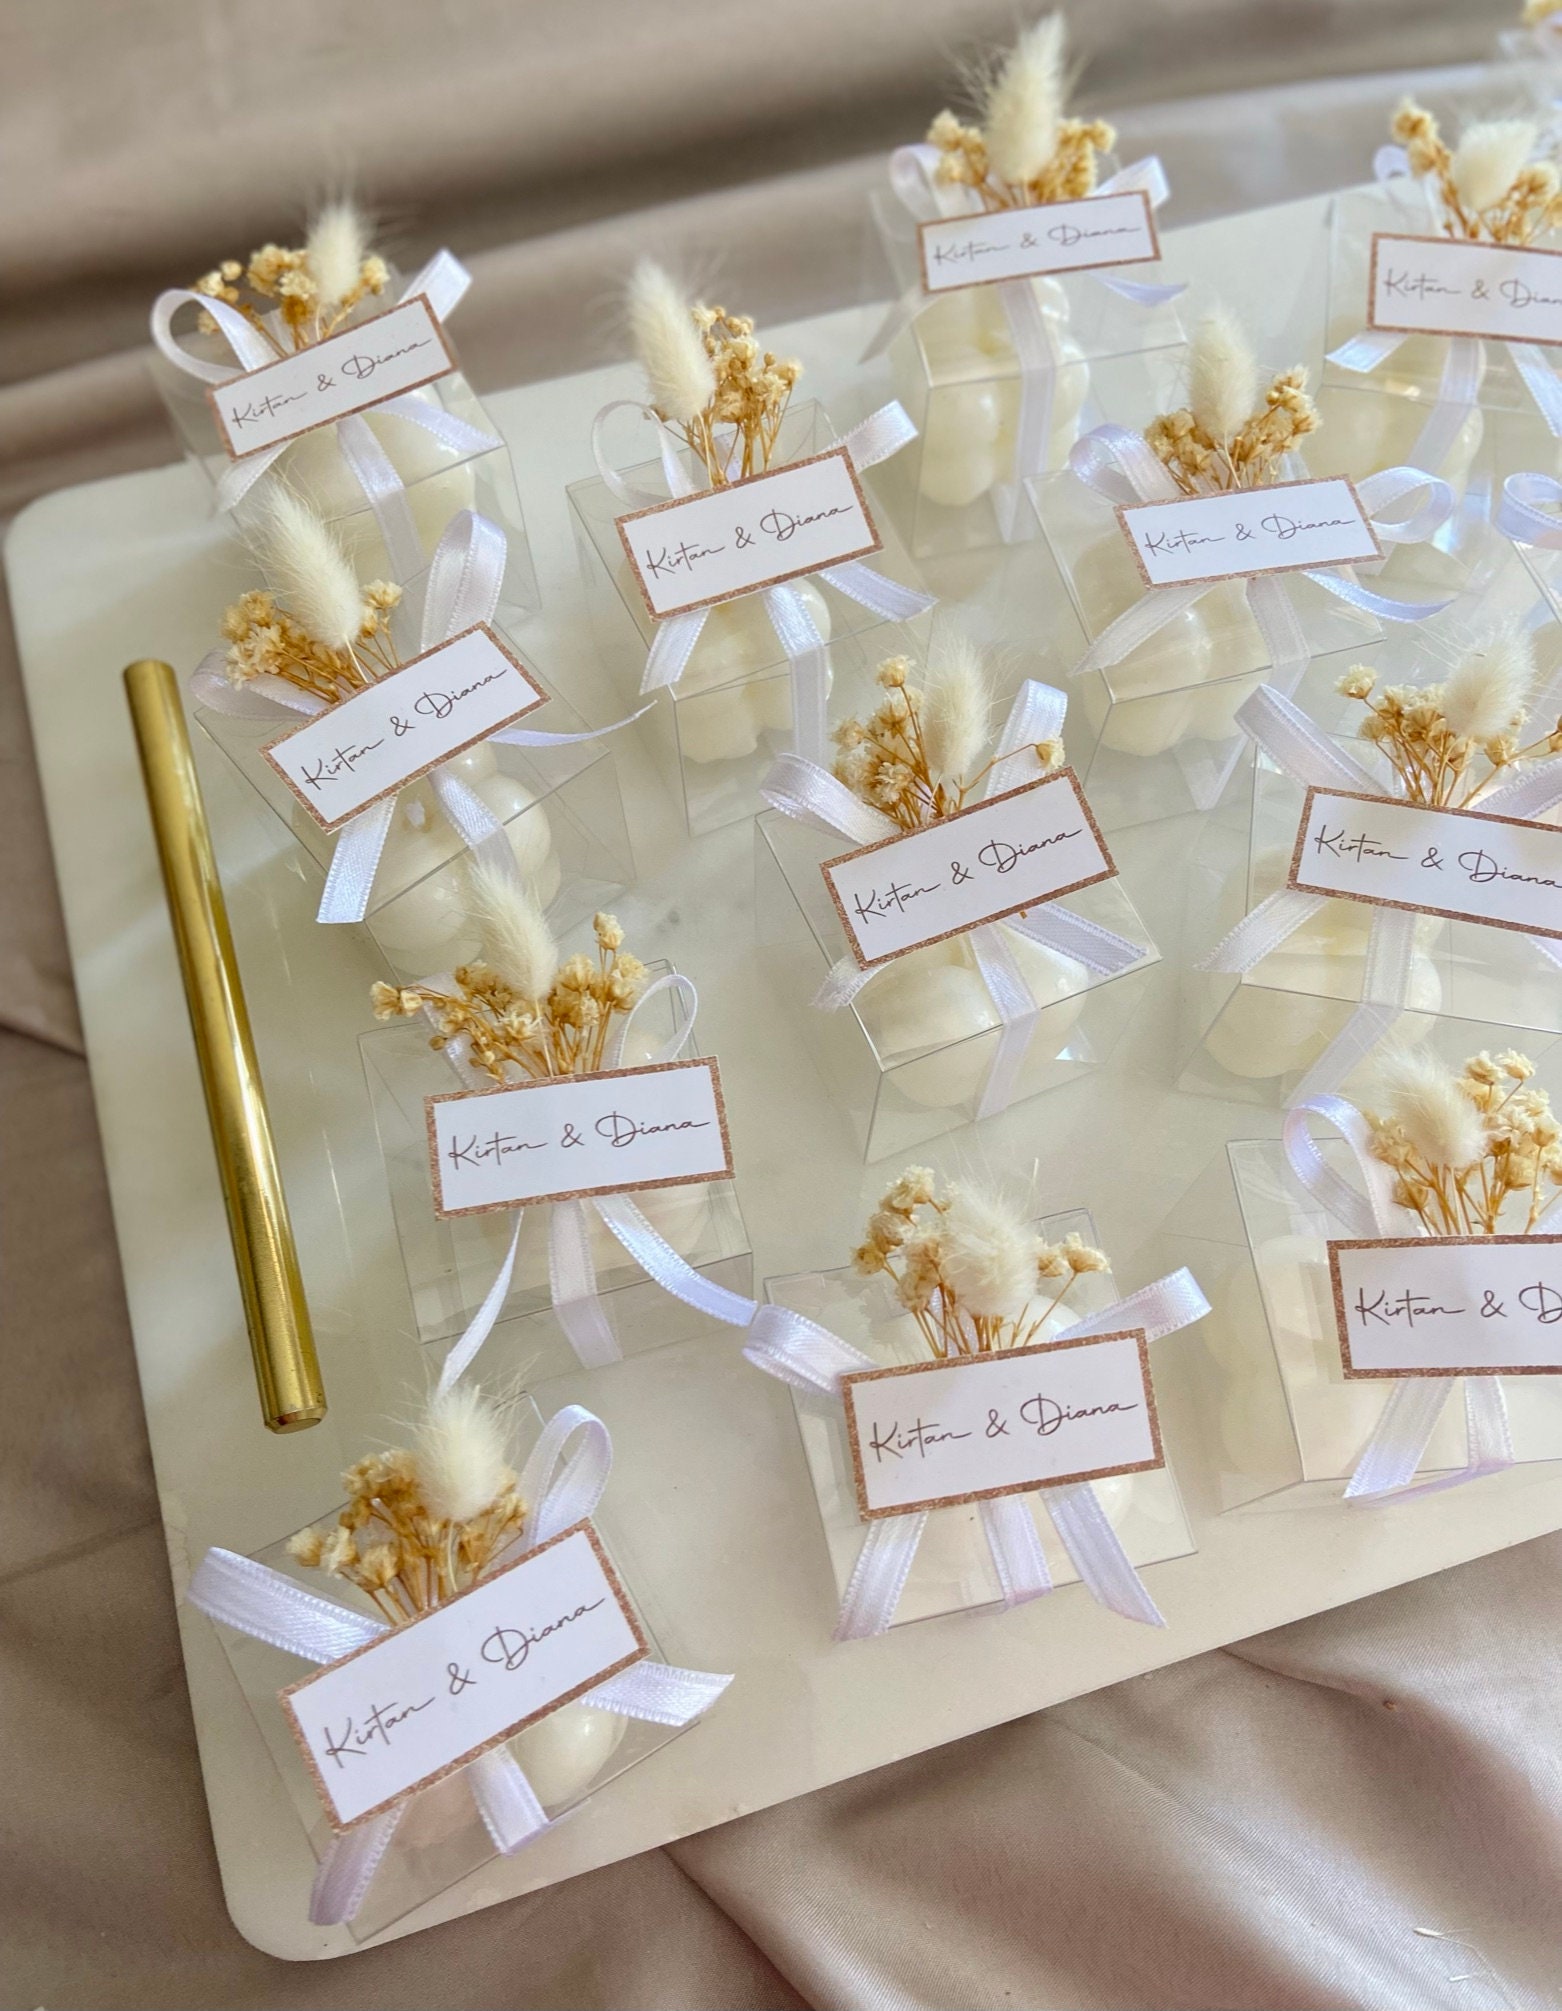 MTLEE 30 Sets Wedding Favors for Guests Bulk Bubble Candles Gifts Wedding  Favors Candles Bridal Shower Favors Candles with Thank You Cards Ribbons